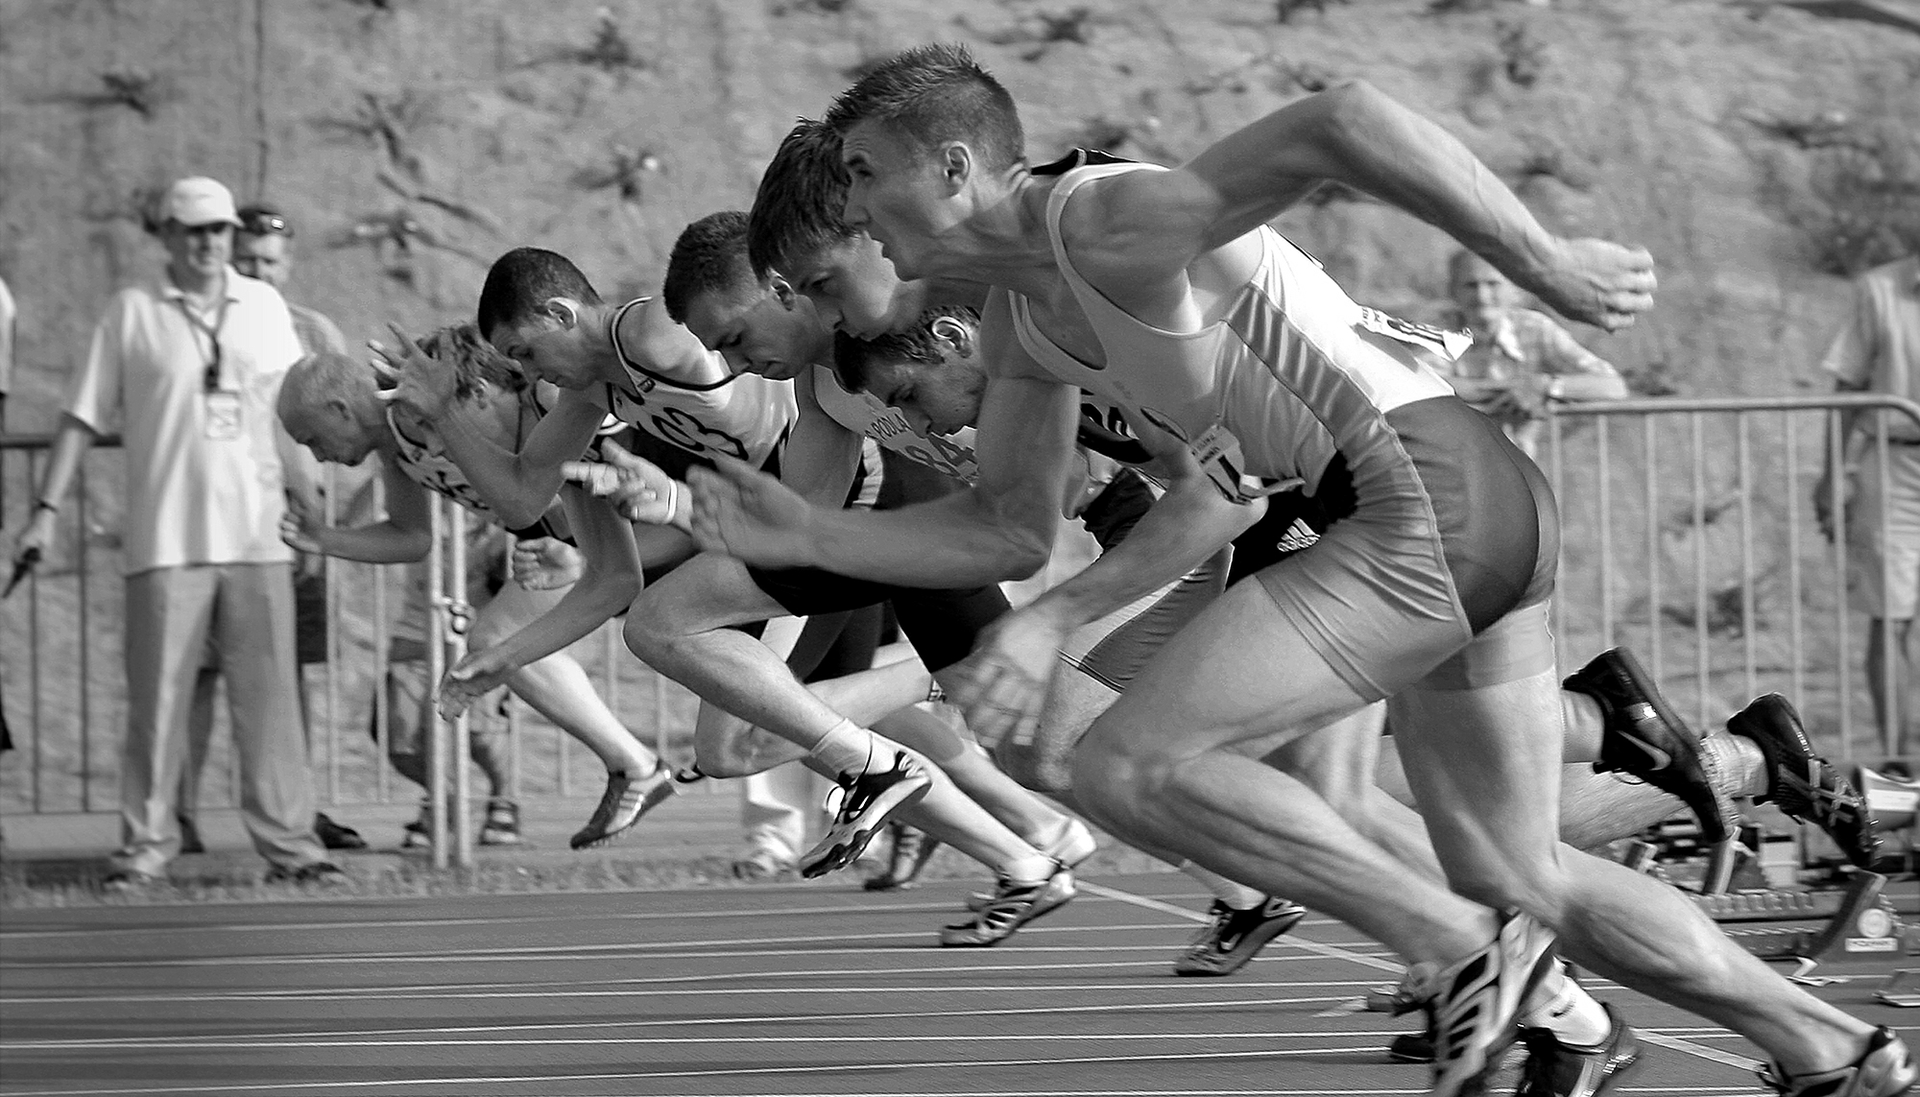 black-and-white photo of race start, showing men propelling themselves off the starting blocks